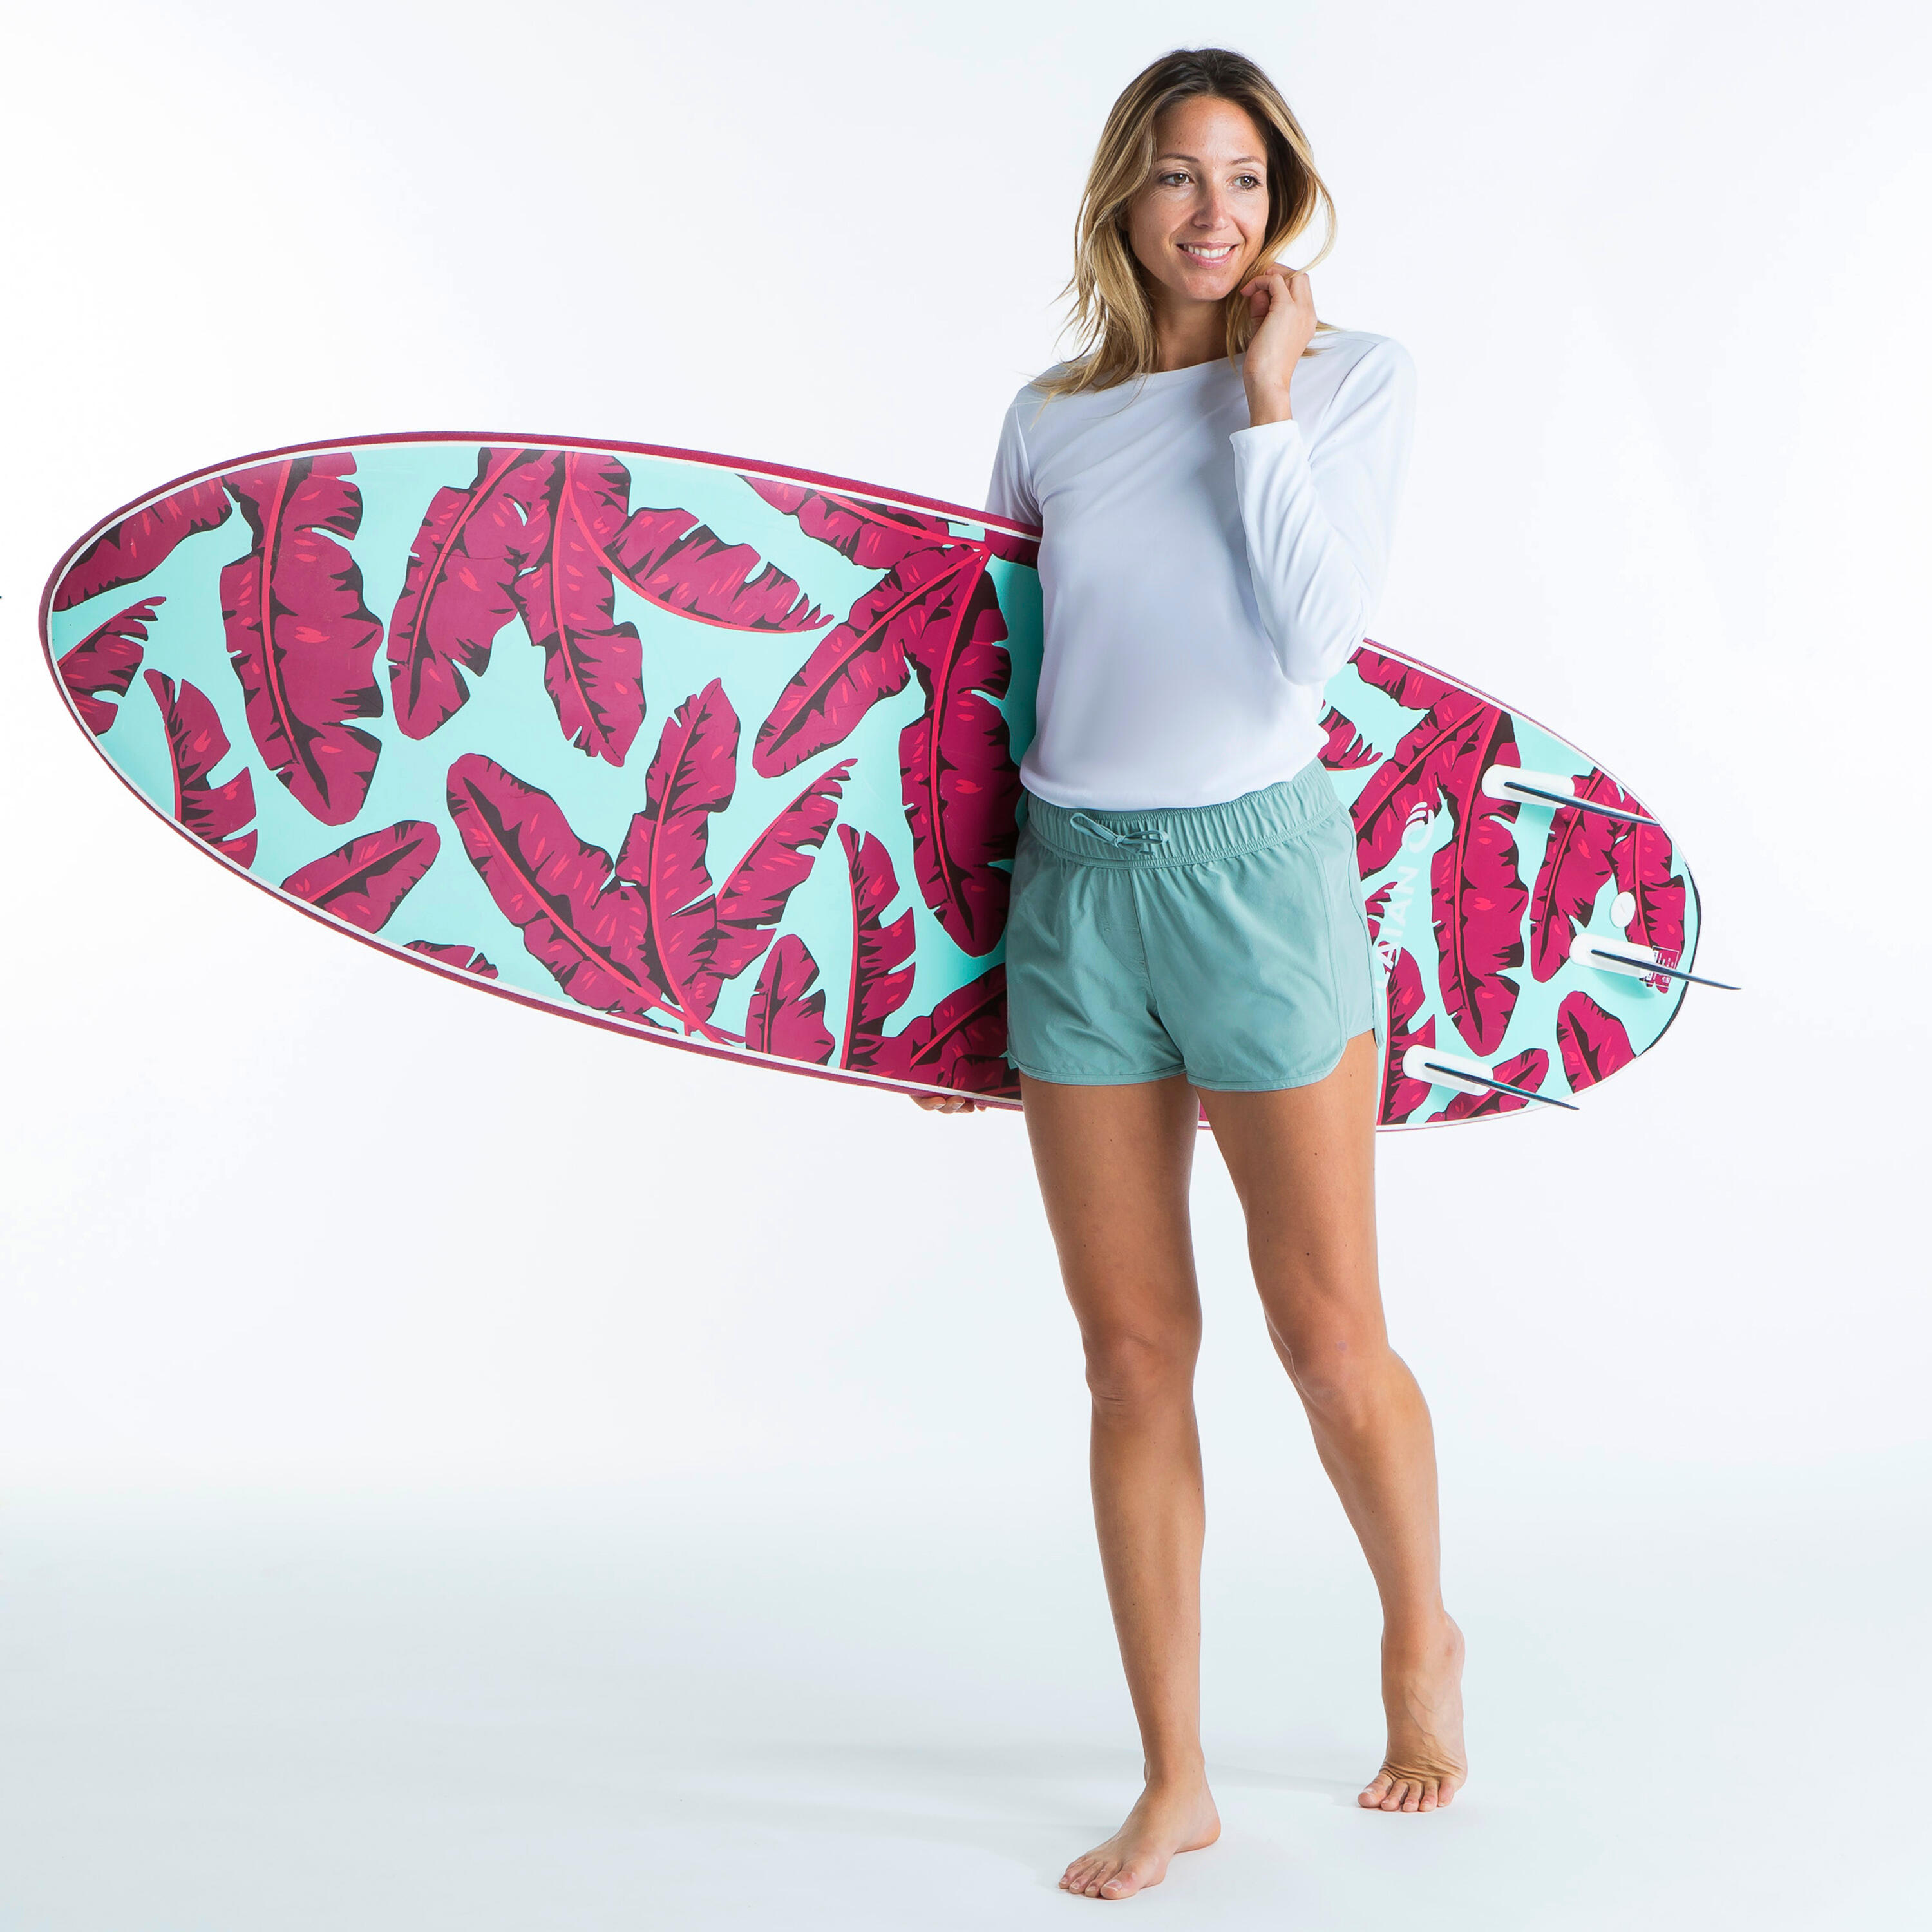 Surfing rash guard for women with a built in BRA!! Goes up to H CUPS  LADIES!!! This top is Made-to-Measure! www.fluidsunw…